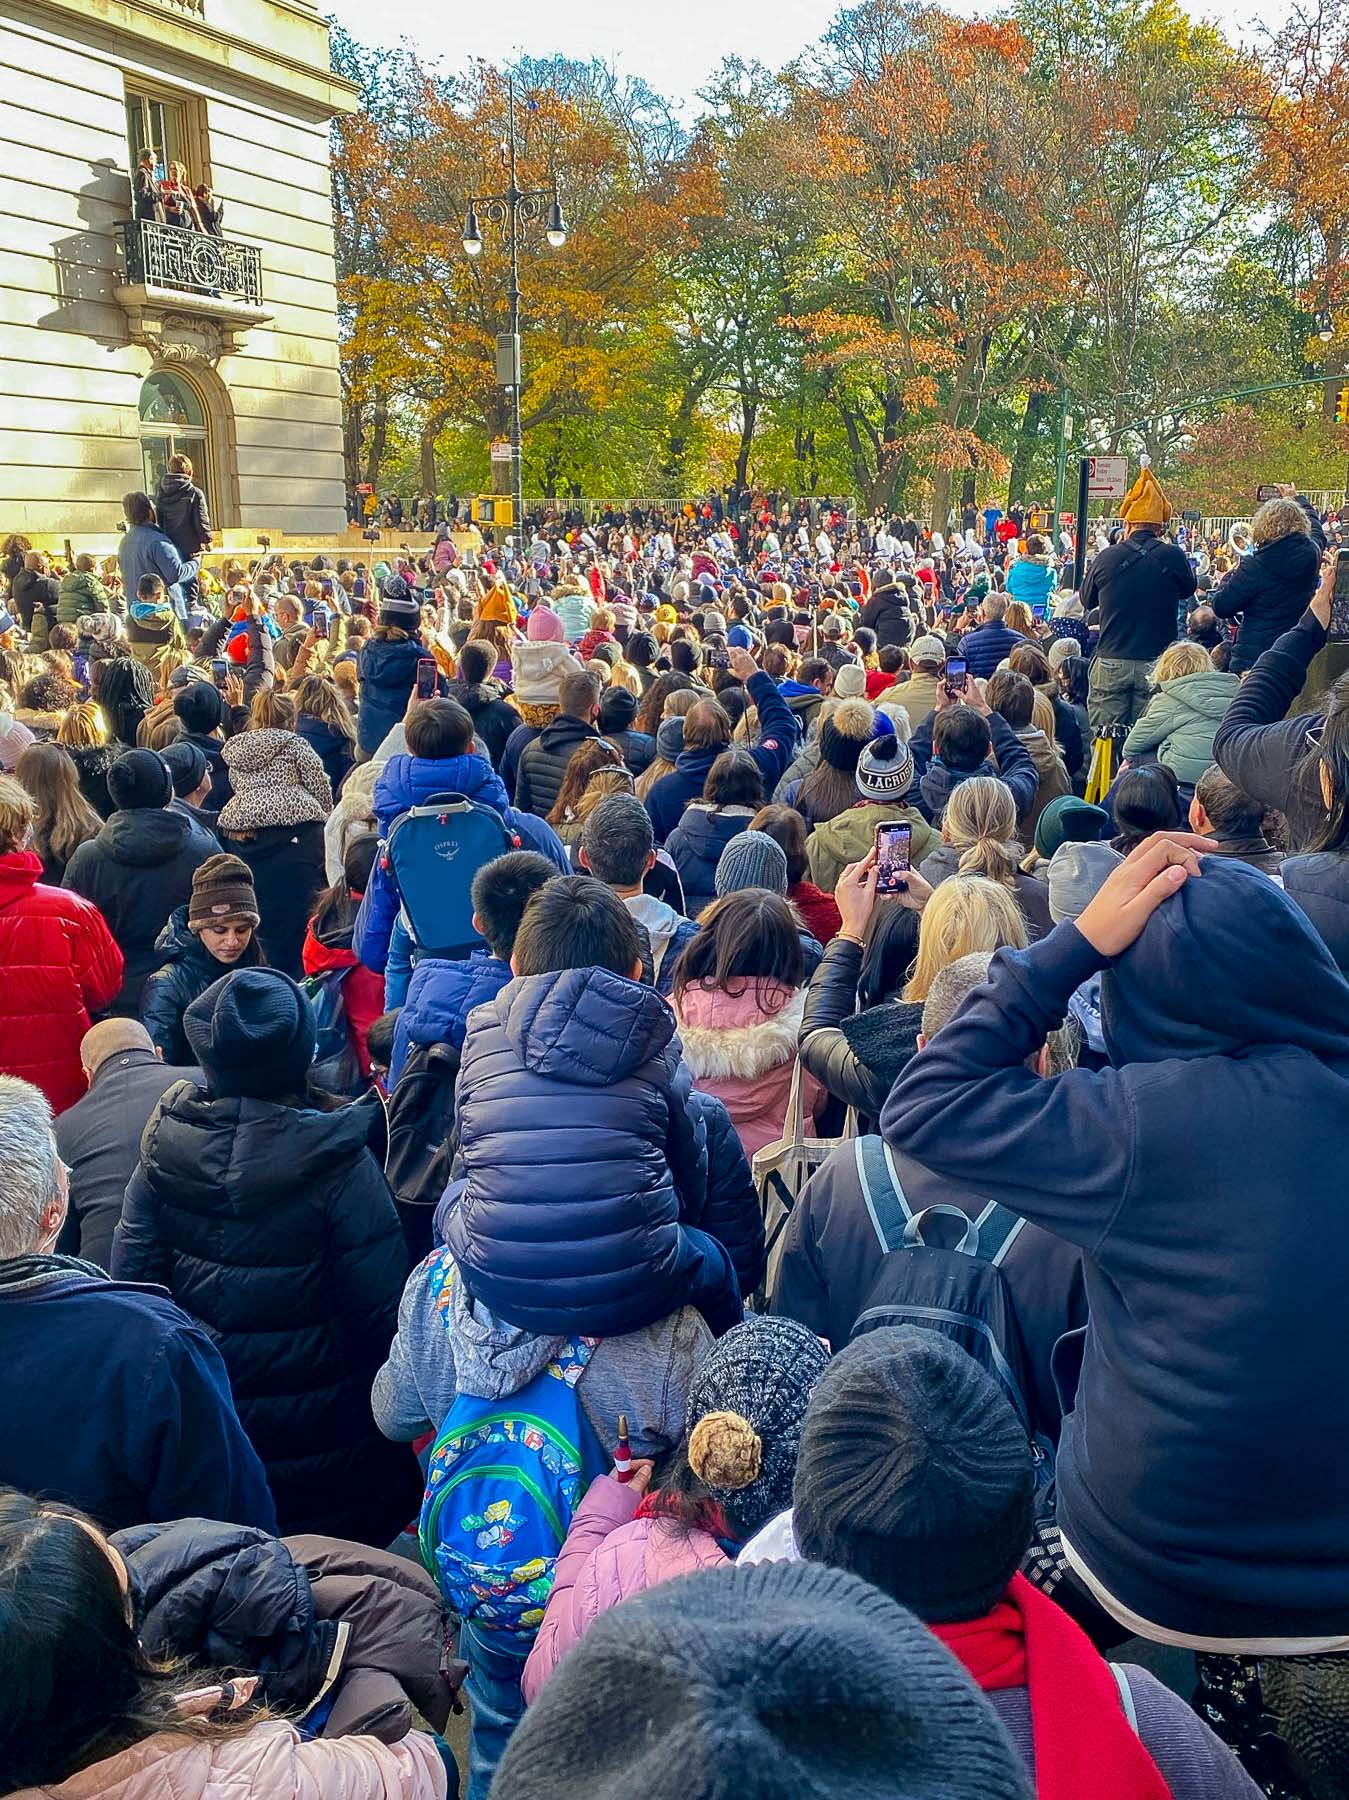 Crowds at the Macy's Thanksgiving Day Parade Guide